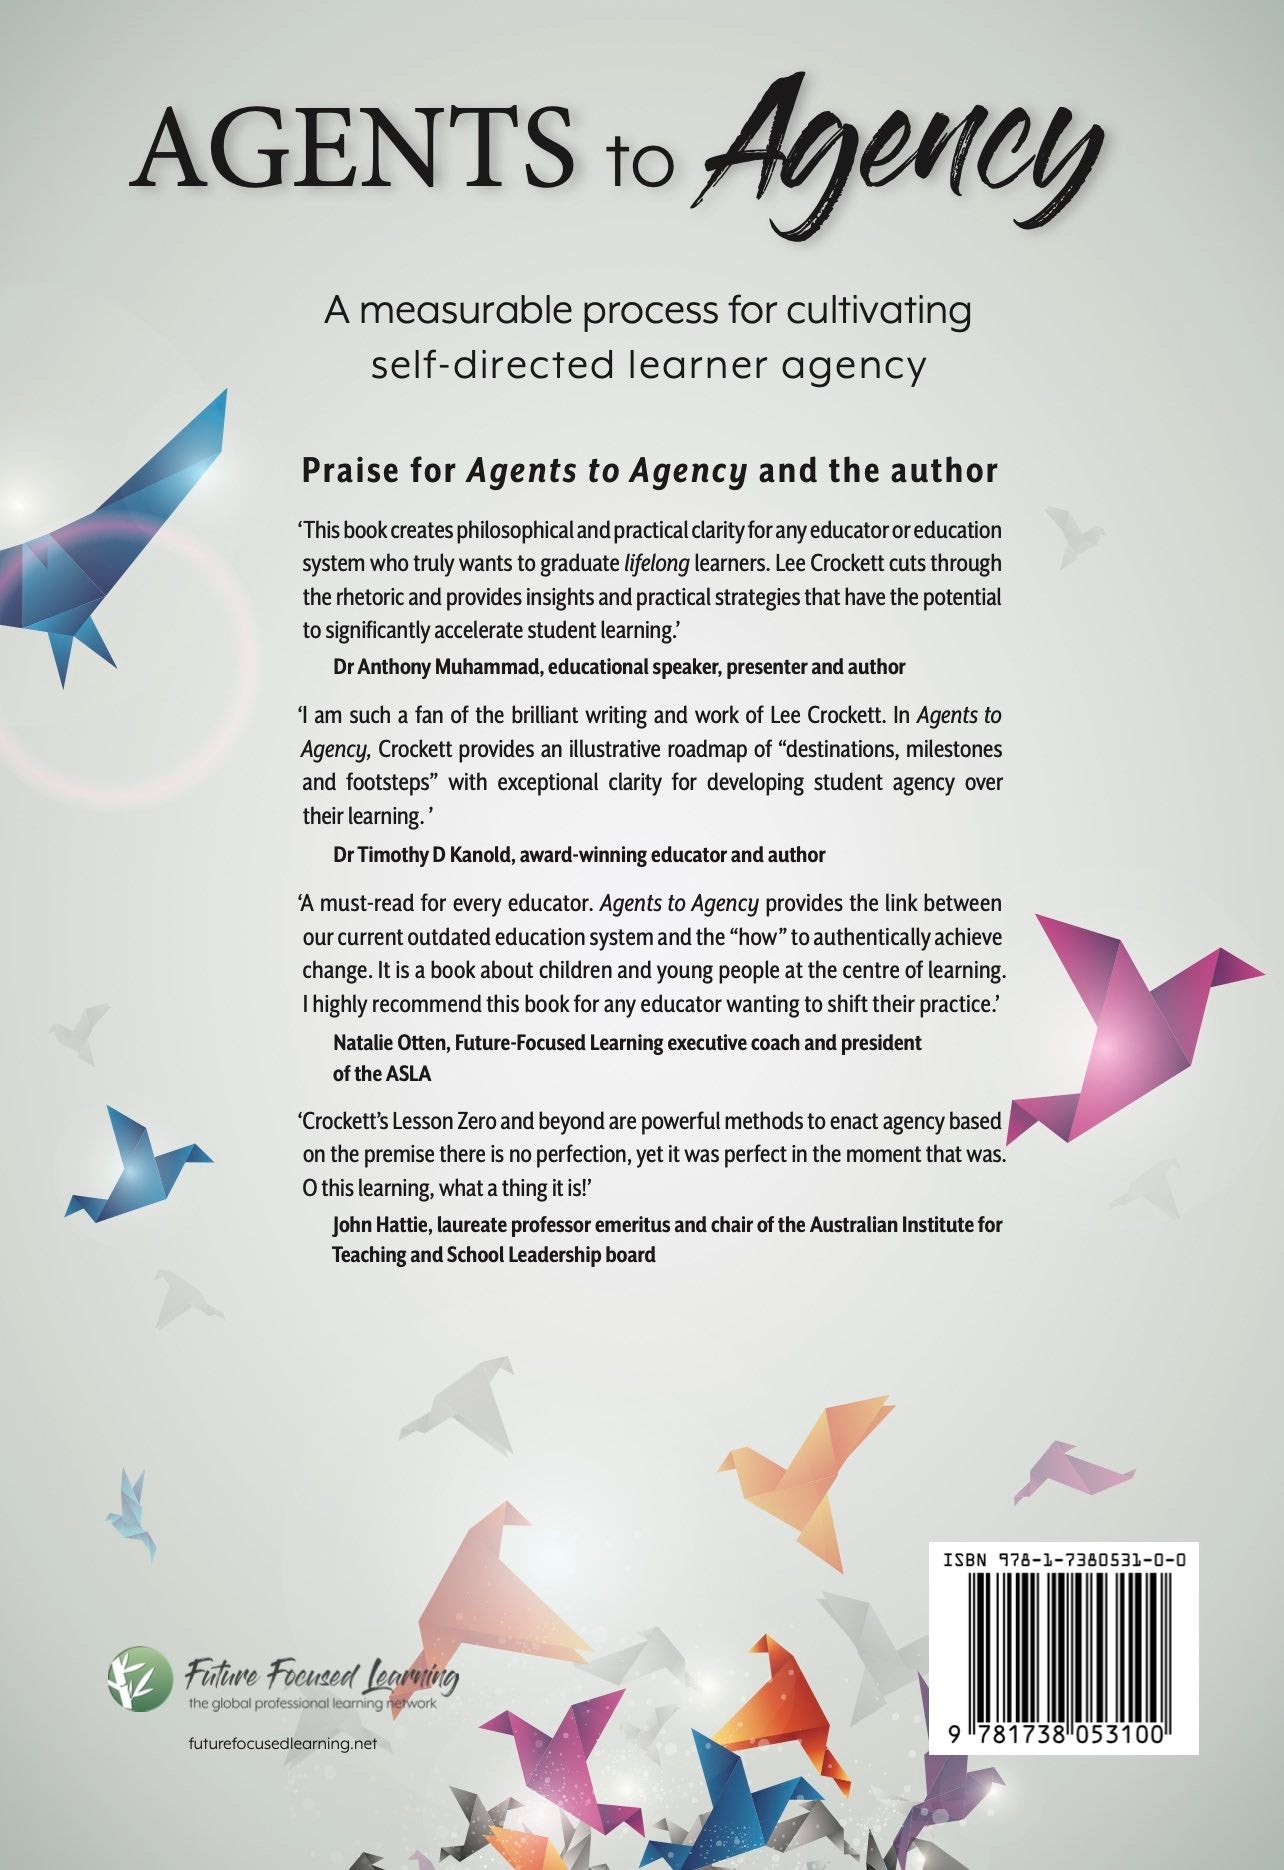 Agents to Agency:  A Measurable Process for Cultivating Self-Directed Learner Agency